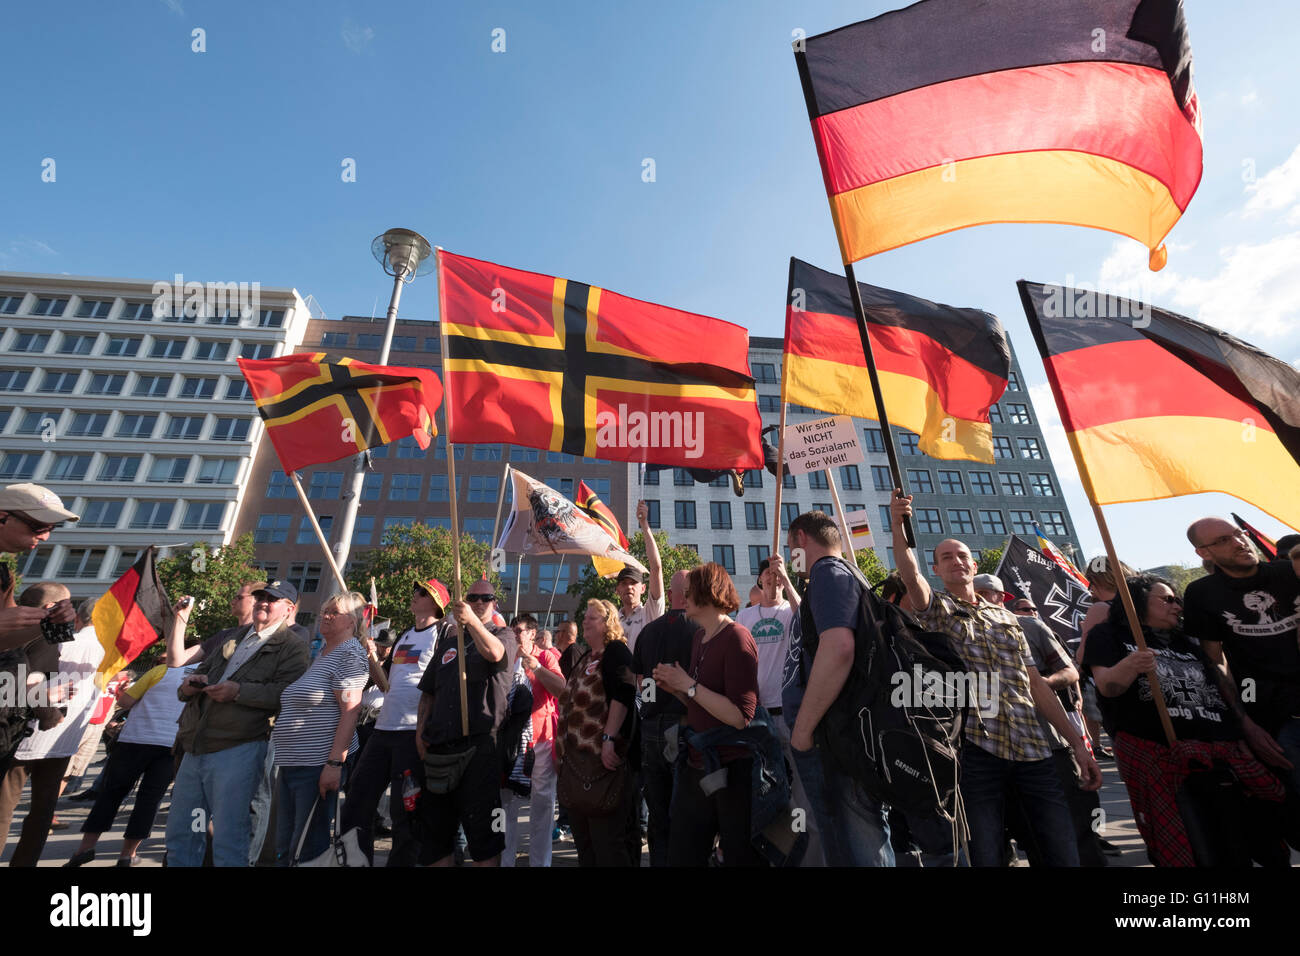 Berlin, Germany. 7th May 2016. Far-right protesters demonstrate against islam, refugees and Angela Merkel in Mitte Berlin. Protesters demanded that Chancellor Angela Merkel stand down because of allowing large numbers of refugees and migrants to enter Germany. Credit:  Iain Masterton/Alamy Live News Stock Photo